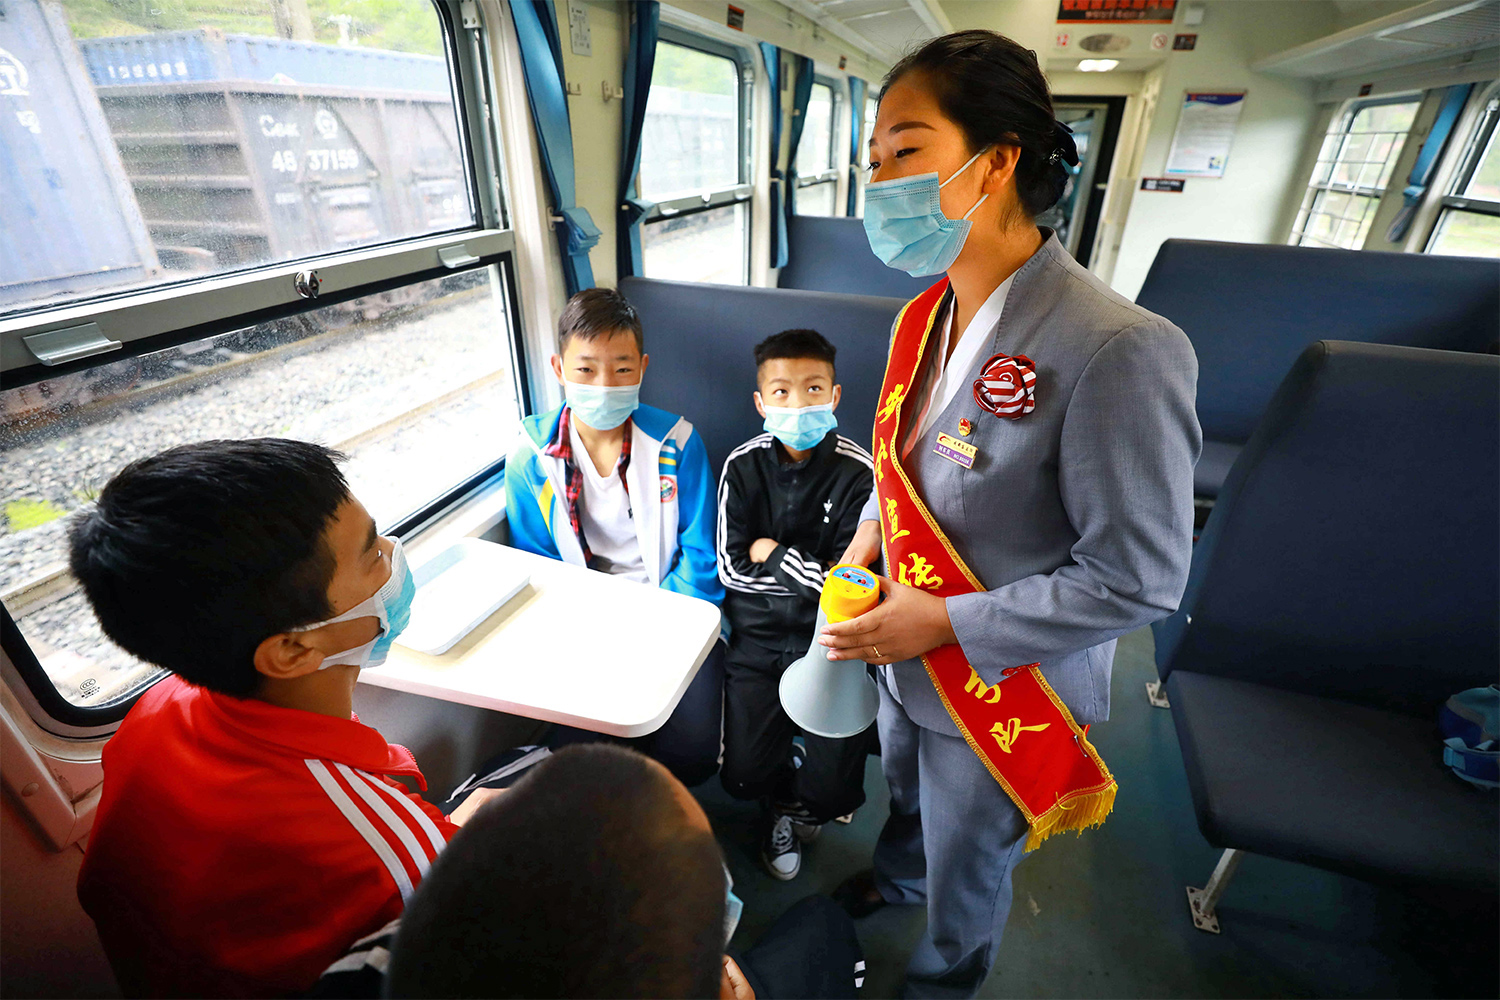 ‘Little slow trains’ in SW China’s Sichuan turned into school buses for Yi children